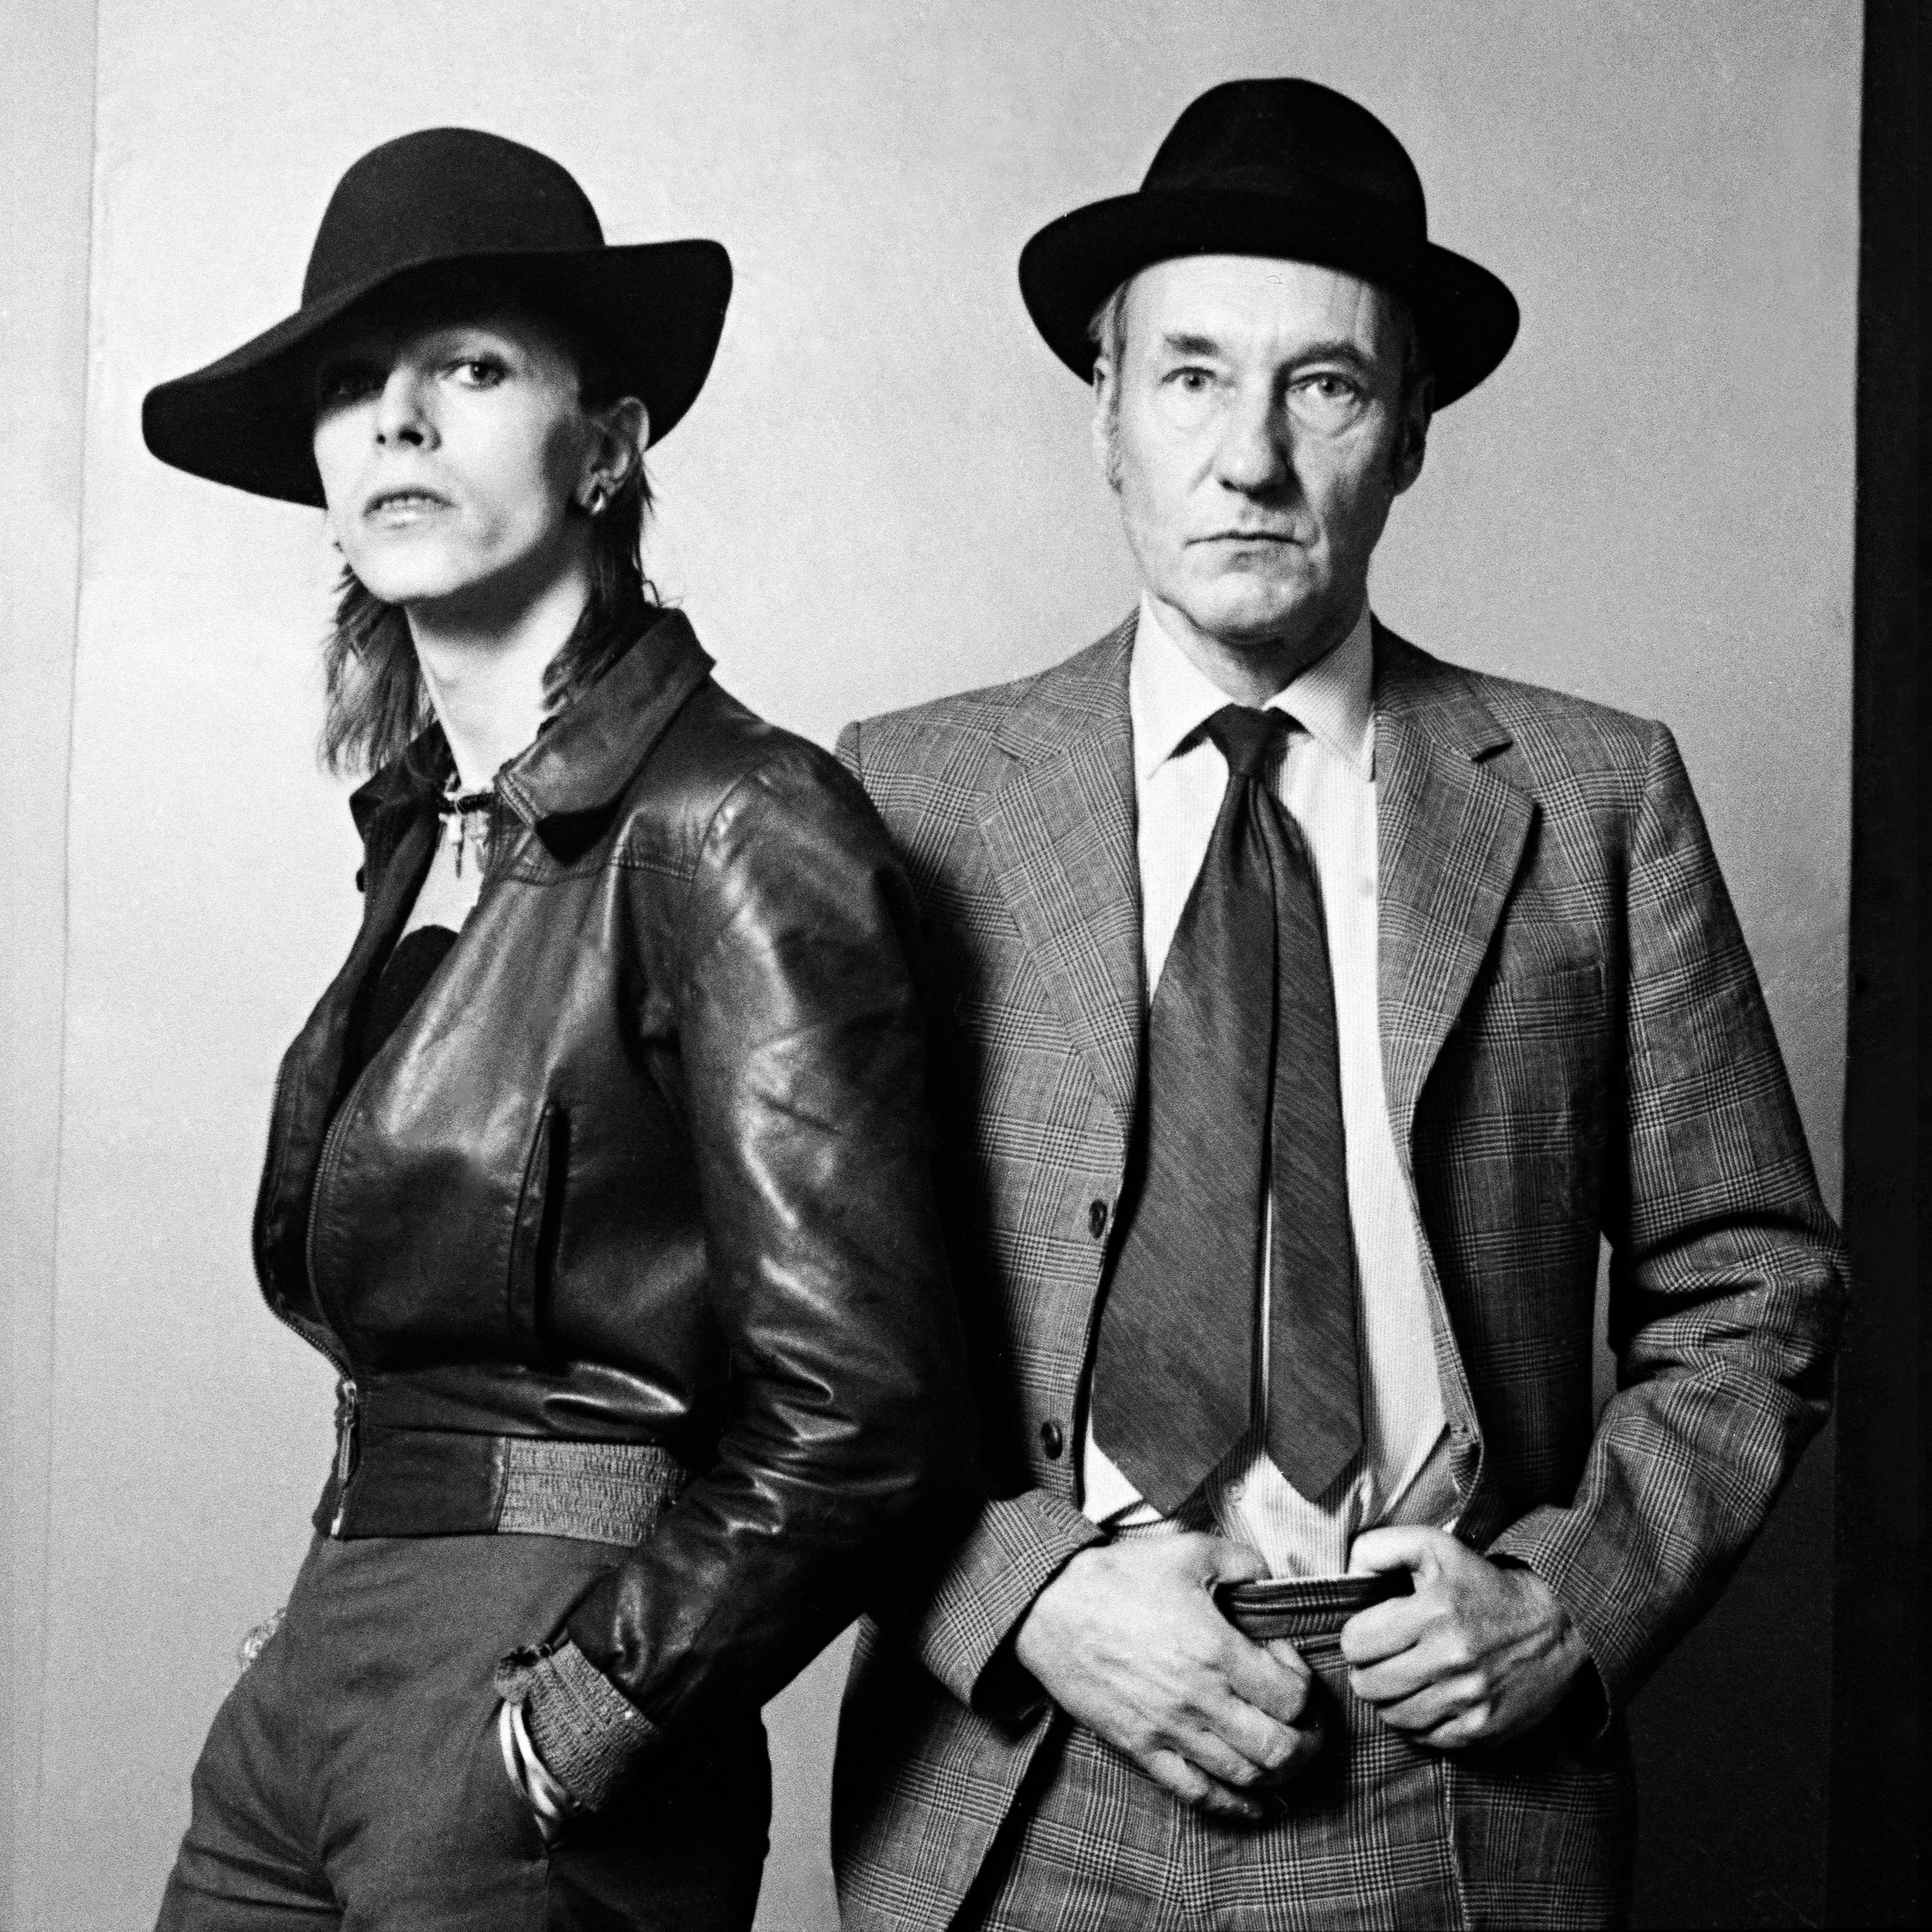 David Bowie and William Burroughs, framed signed print by Terry O'Neill